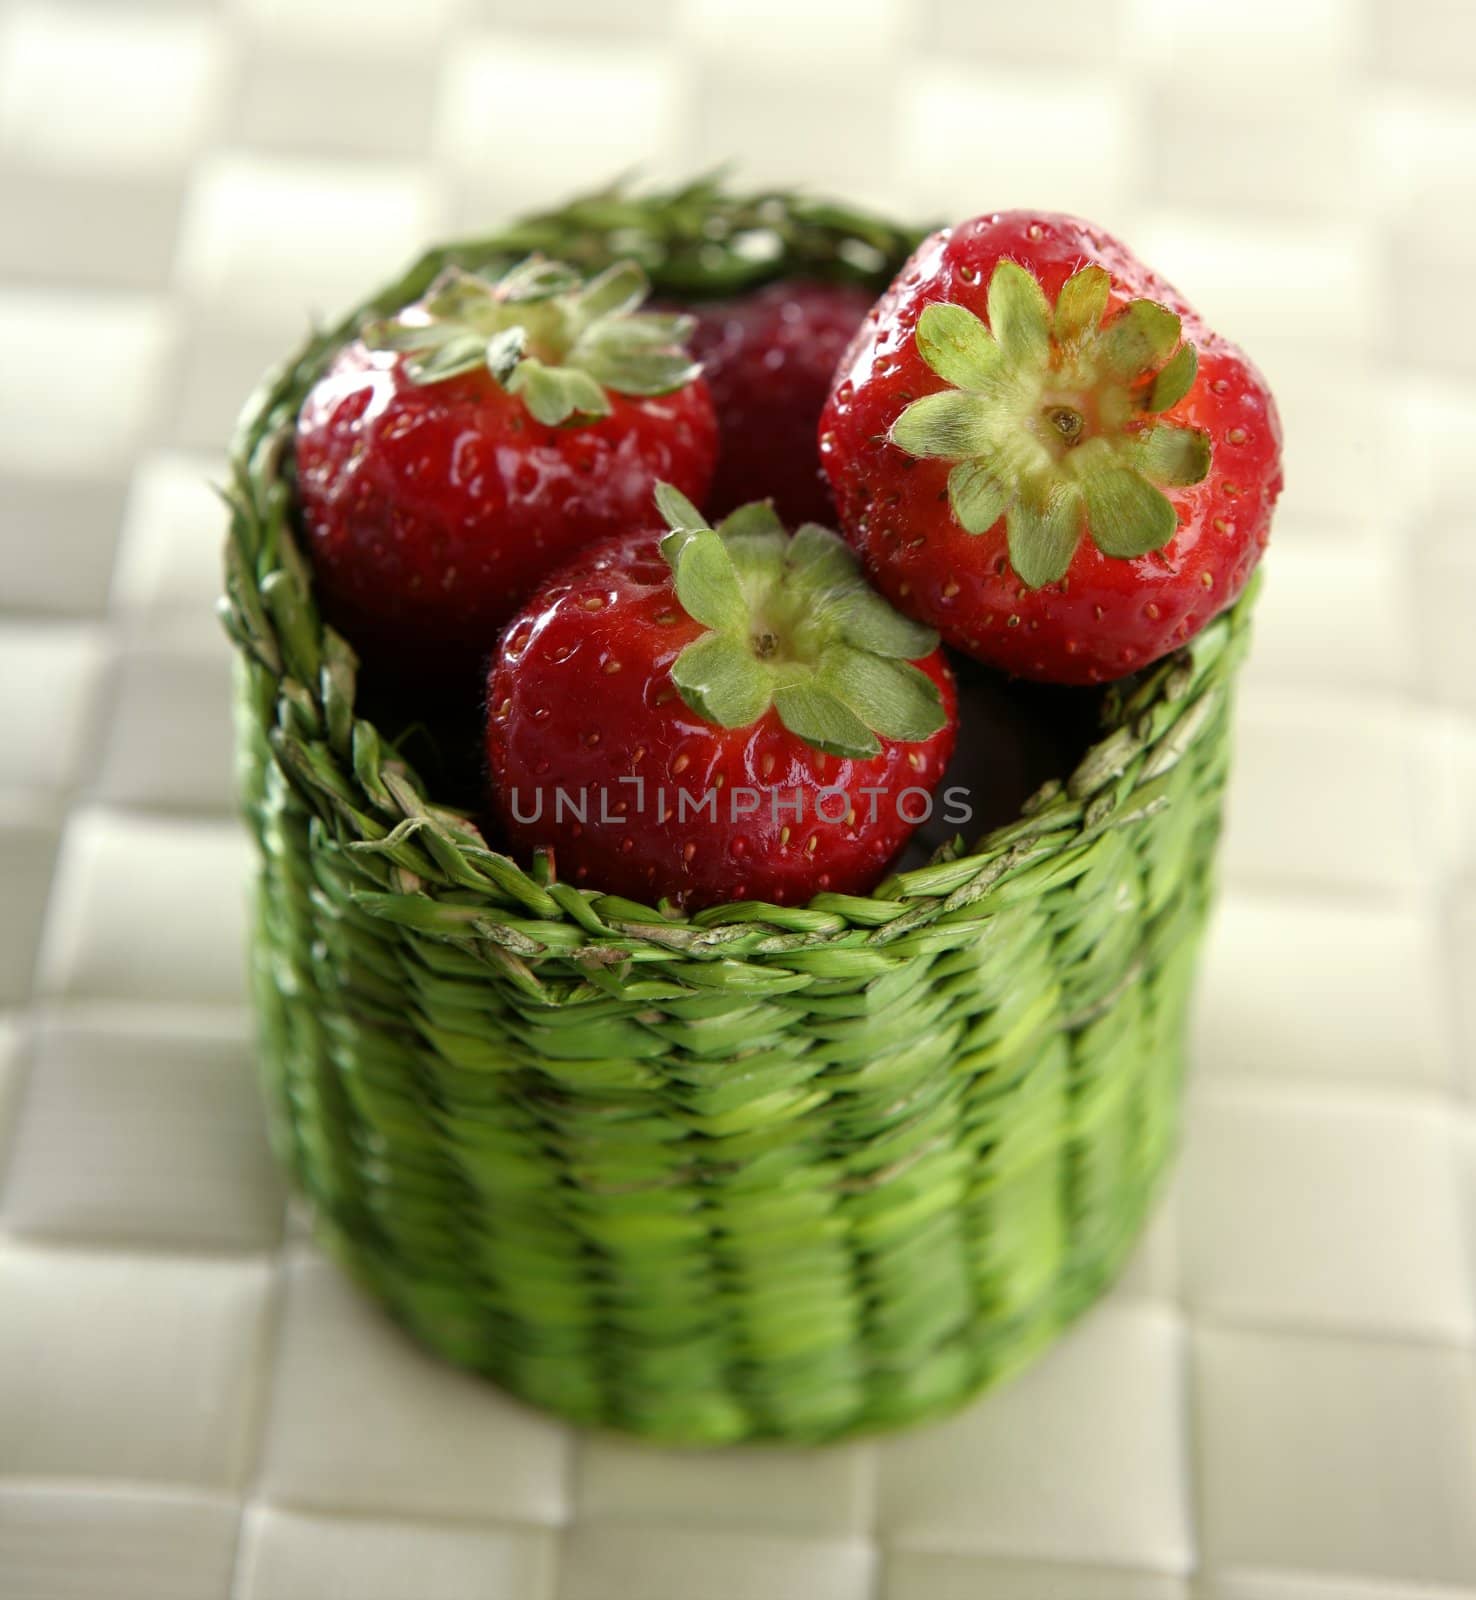 Strawberries in a green little basket over white tablecloth